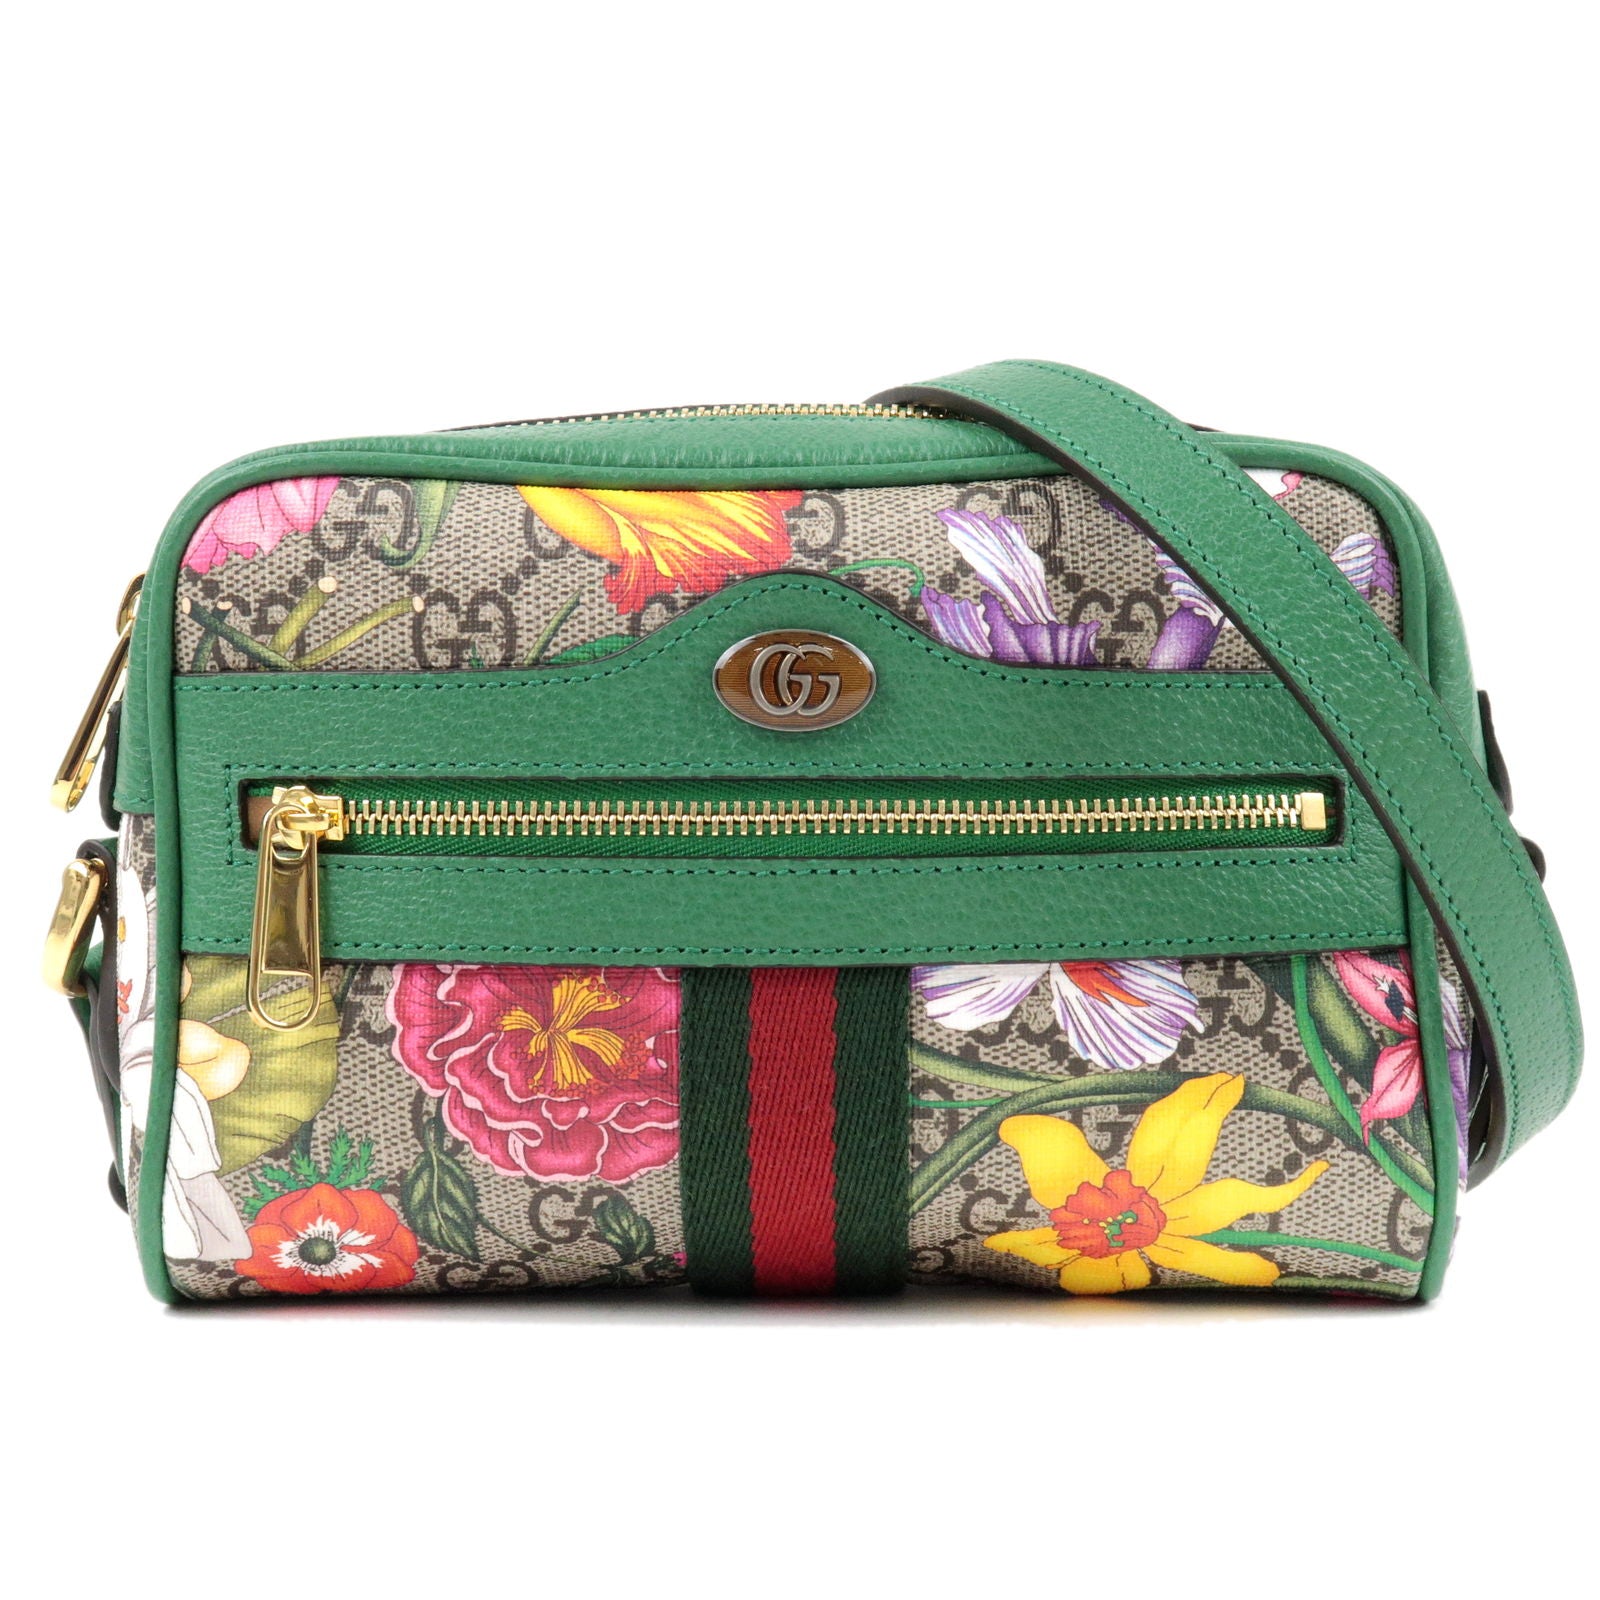 GUCCI-Ophidia-GG-Flora-Supreme-Leather-Crossbody-Bag-517350